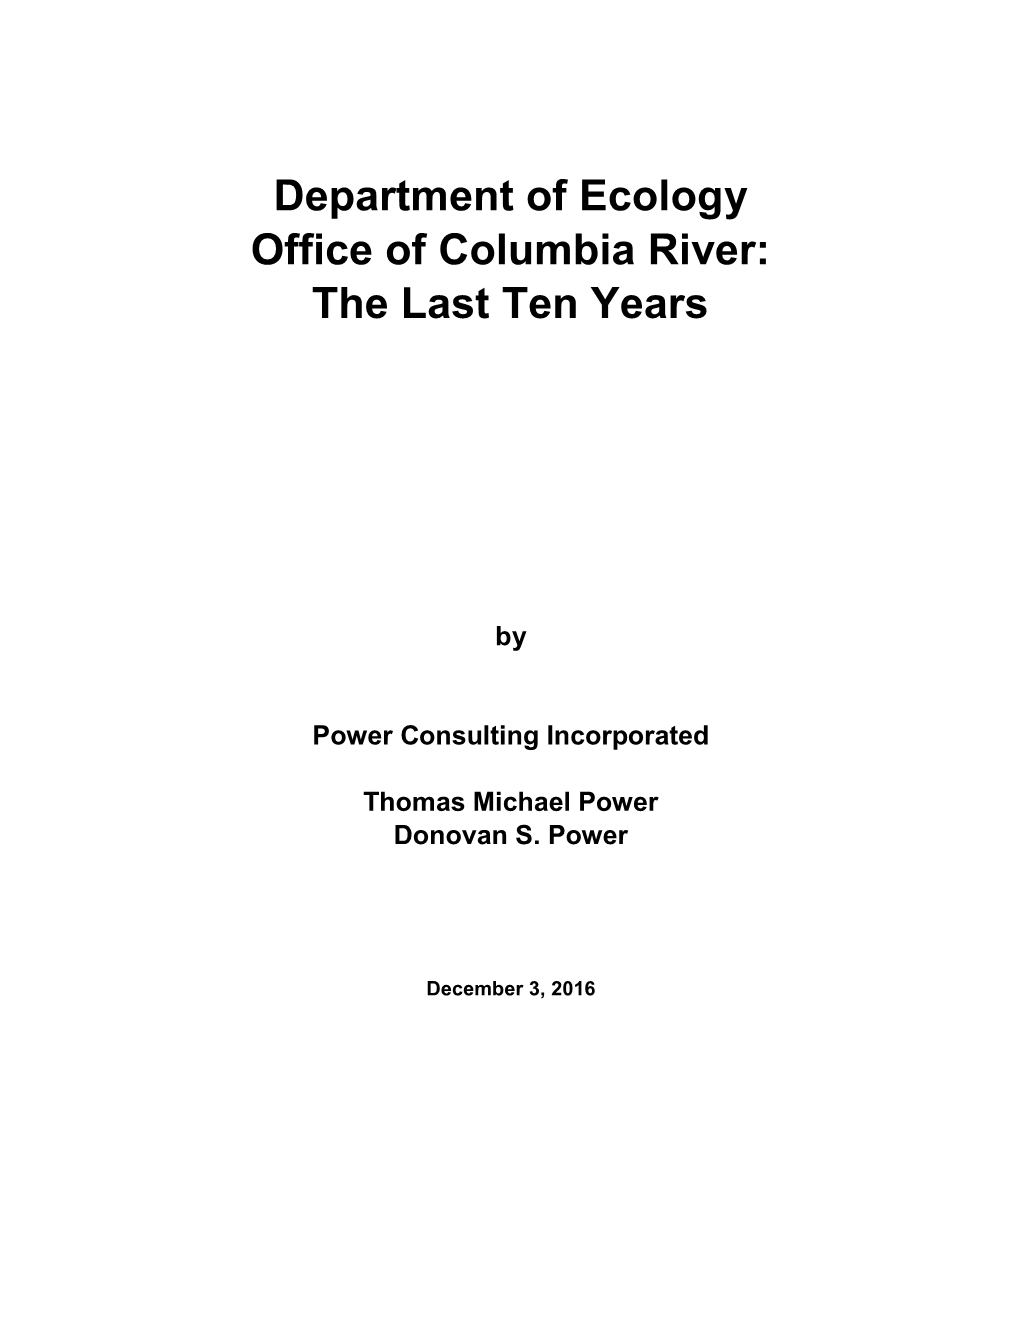 Department of Ecology Office of Columbia River: the Last Ten Years